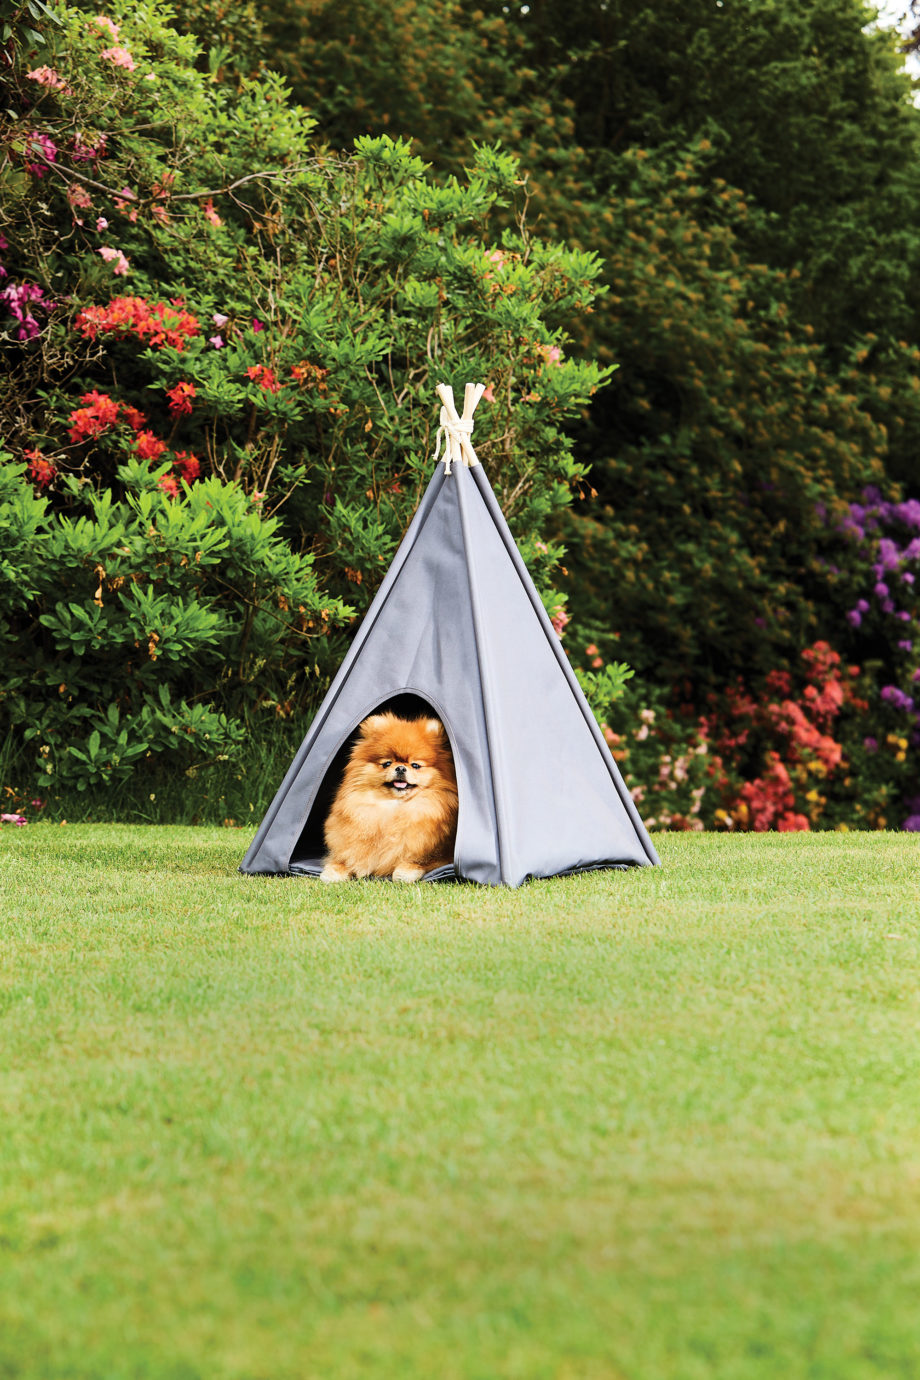 Dog sitting in a pet teepee on a lawn